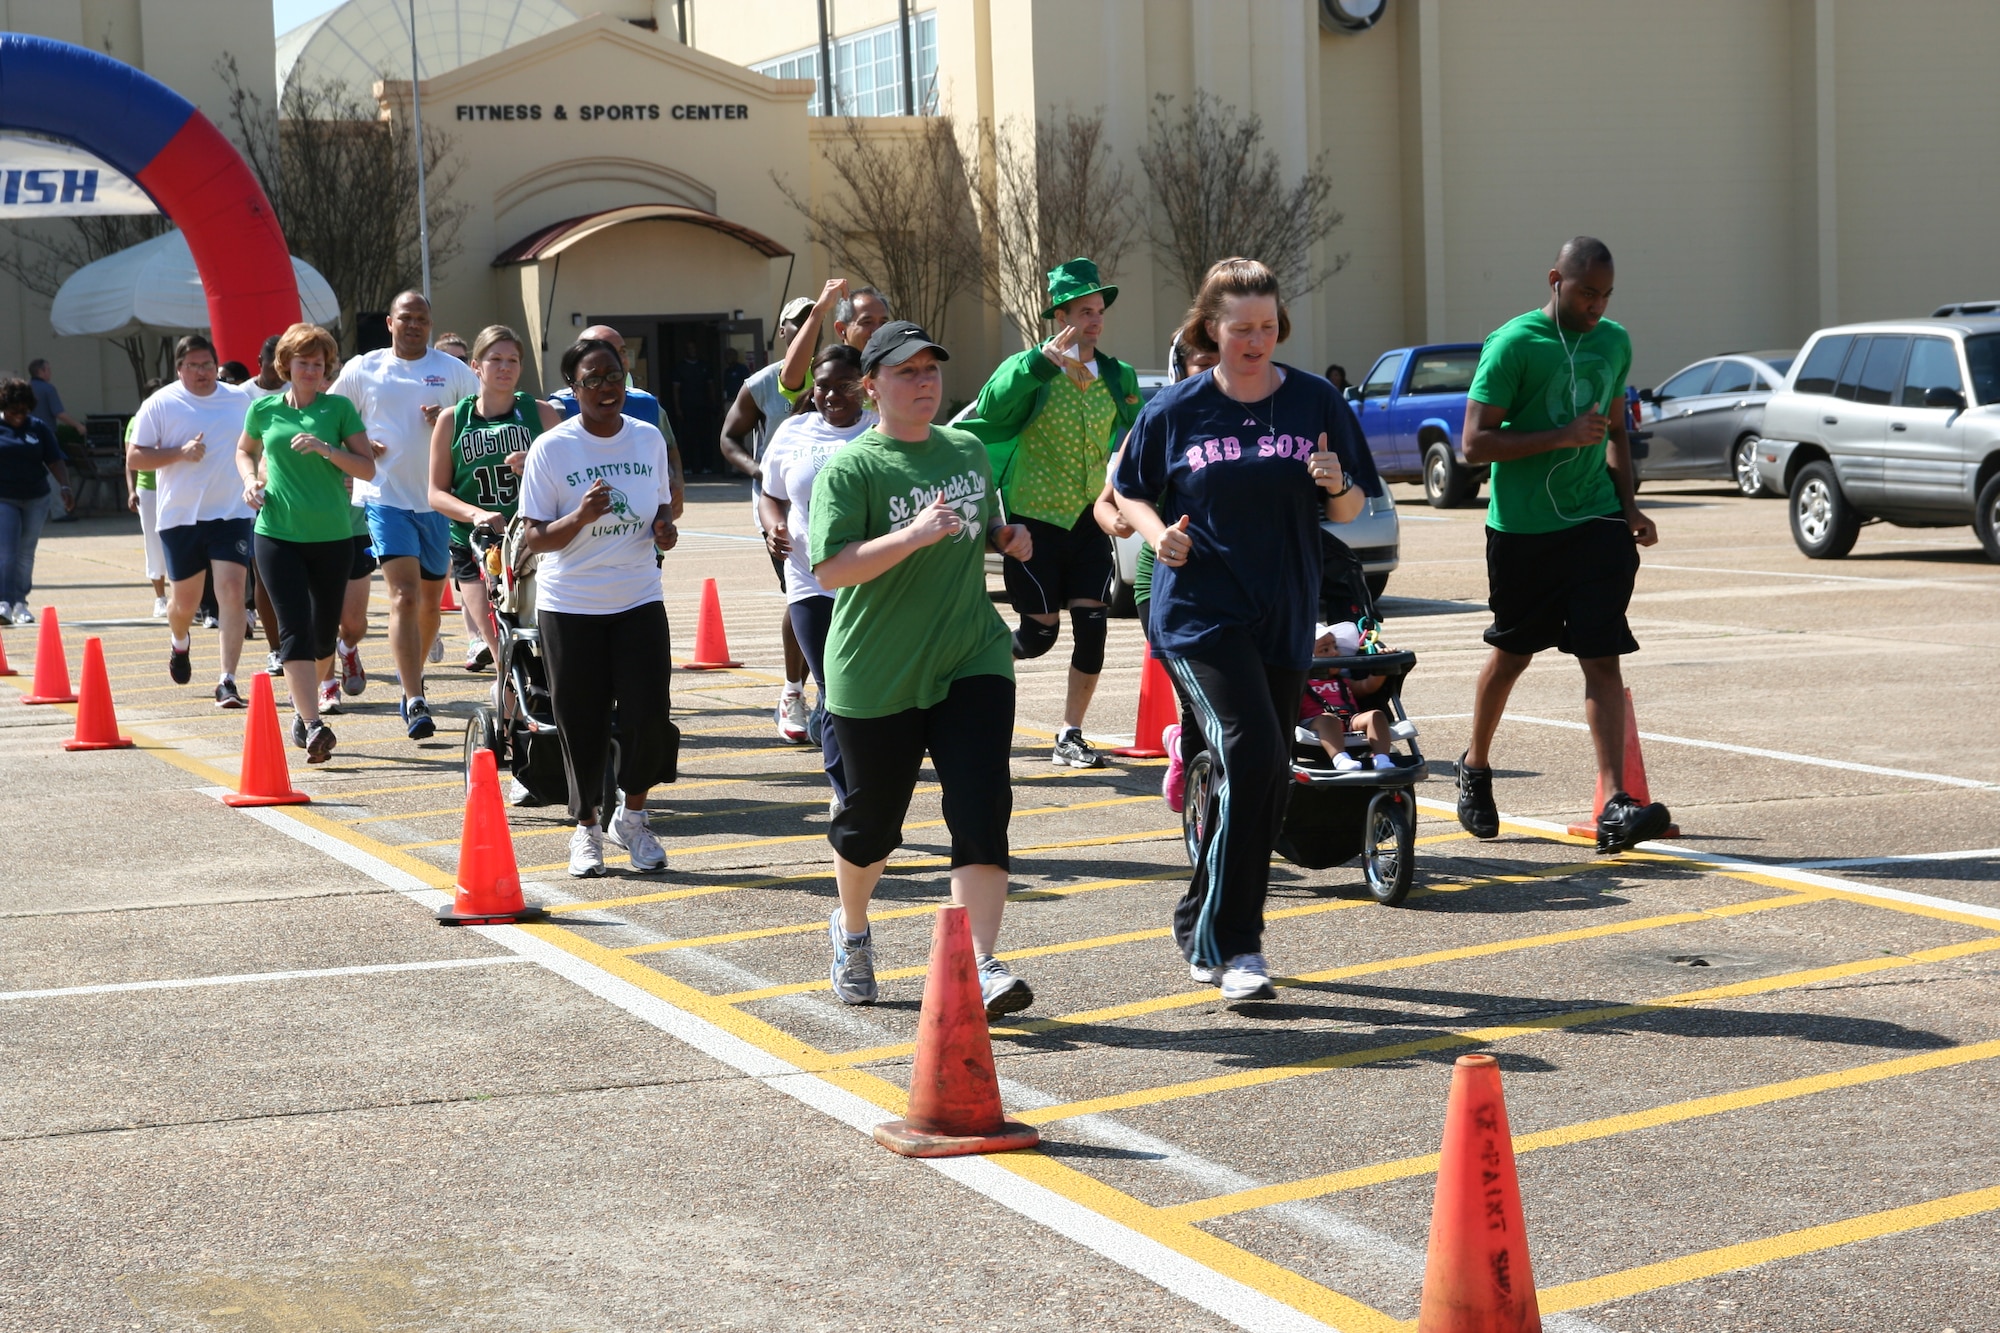 Runners show their Irish pride by wearing green during the 5-kilometer St. Patrick’s Day/Women’s History Month Run March 15 at the Maxwell fitness center. For information about fitness opportunities, visit 42fss.us. (Air Force photo/Kelly Deichert)